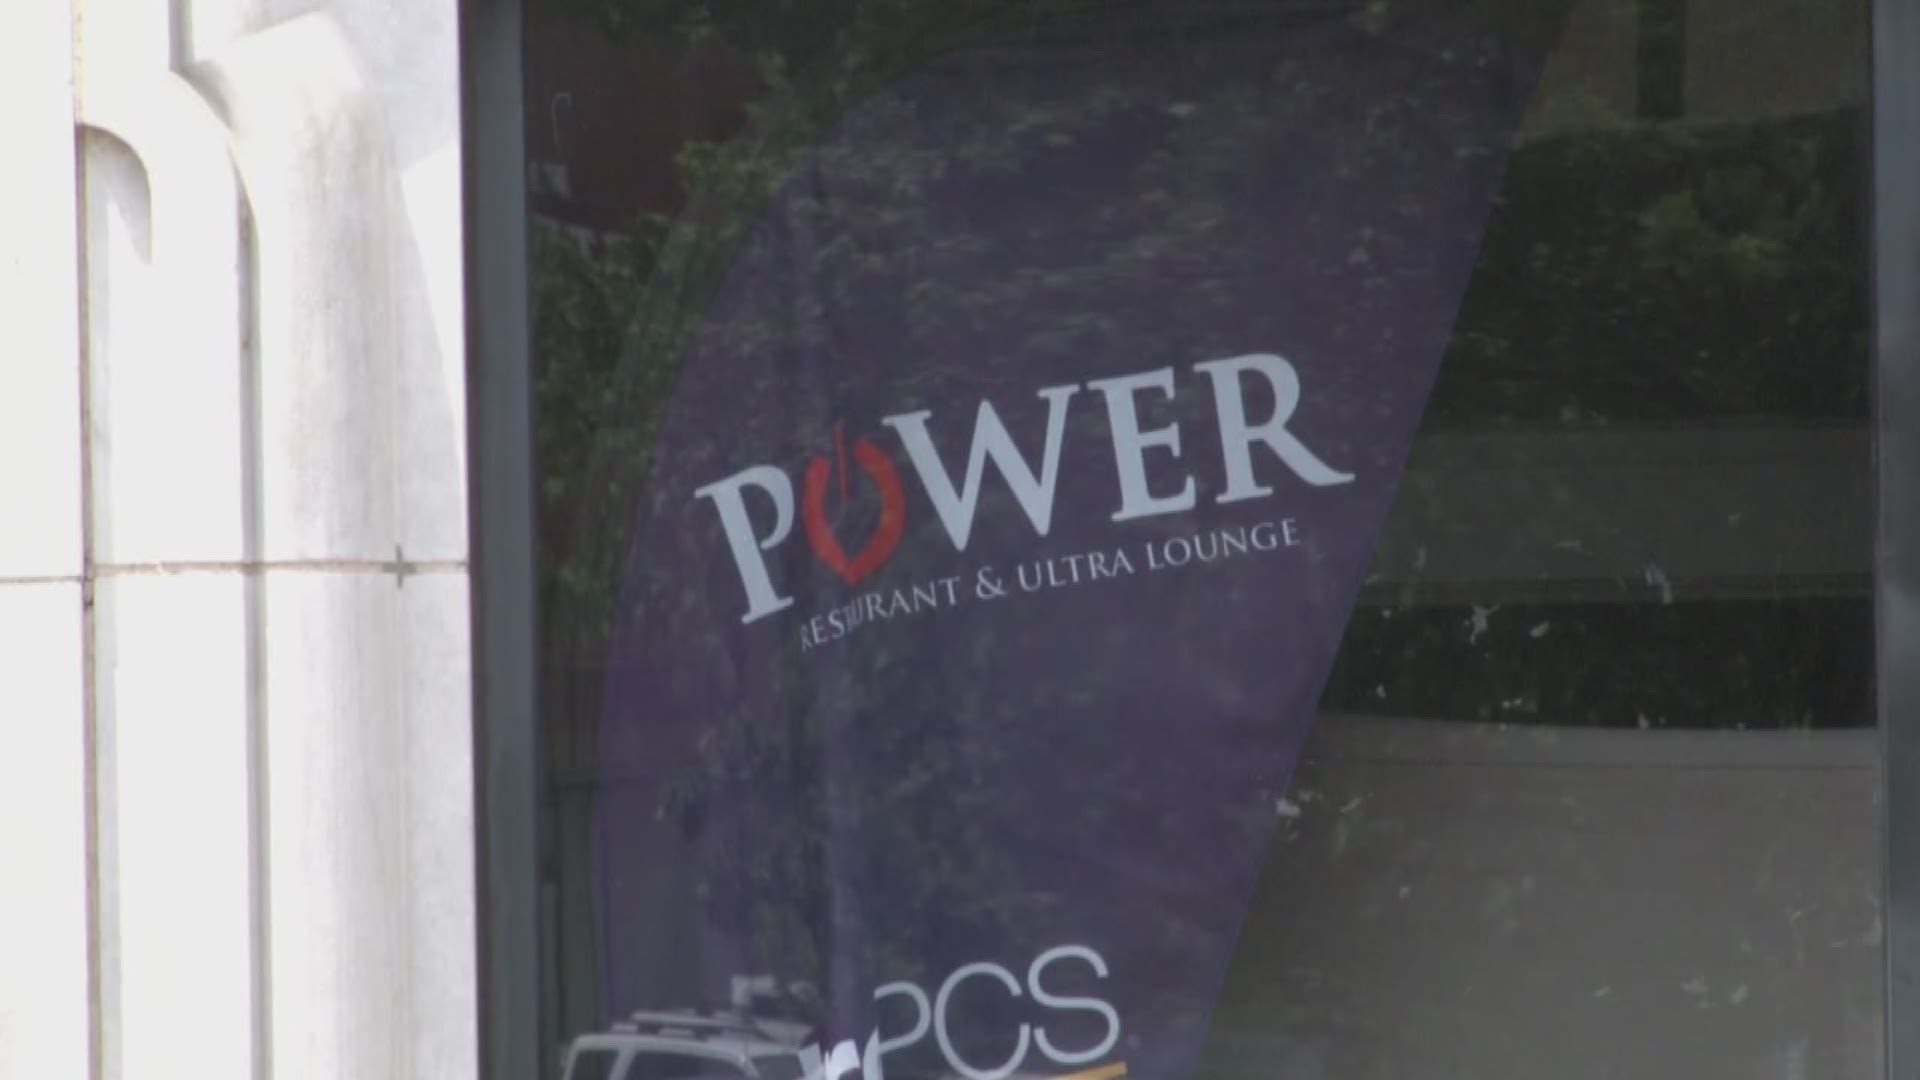 911 tapes are released following the shooting at Power Ultra Lounge in downtown Little Rock.